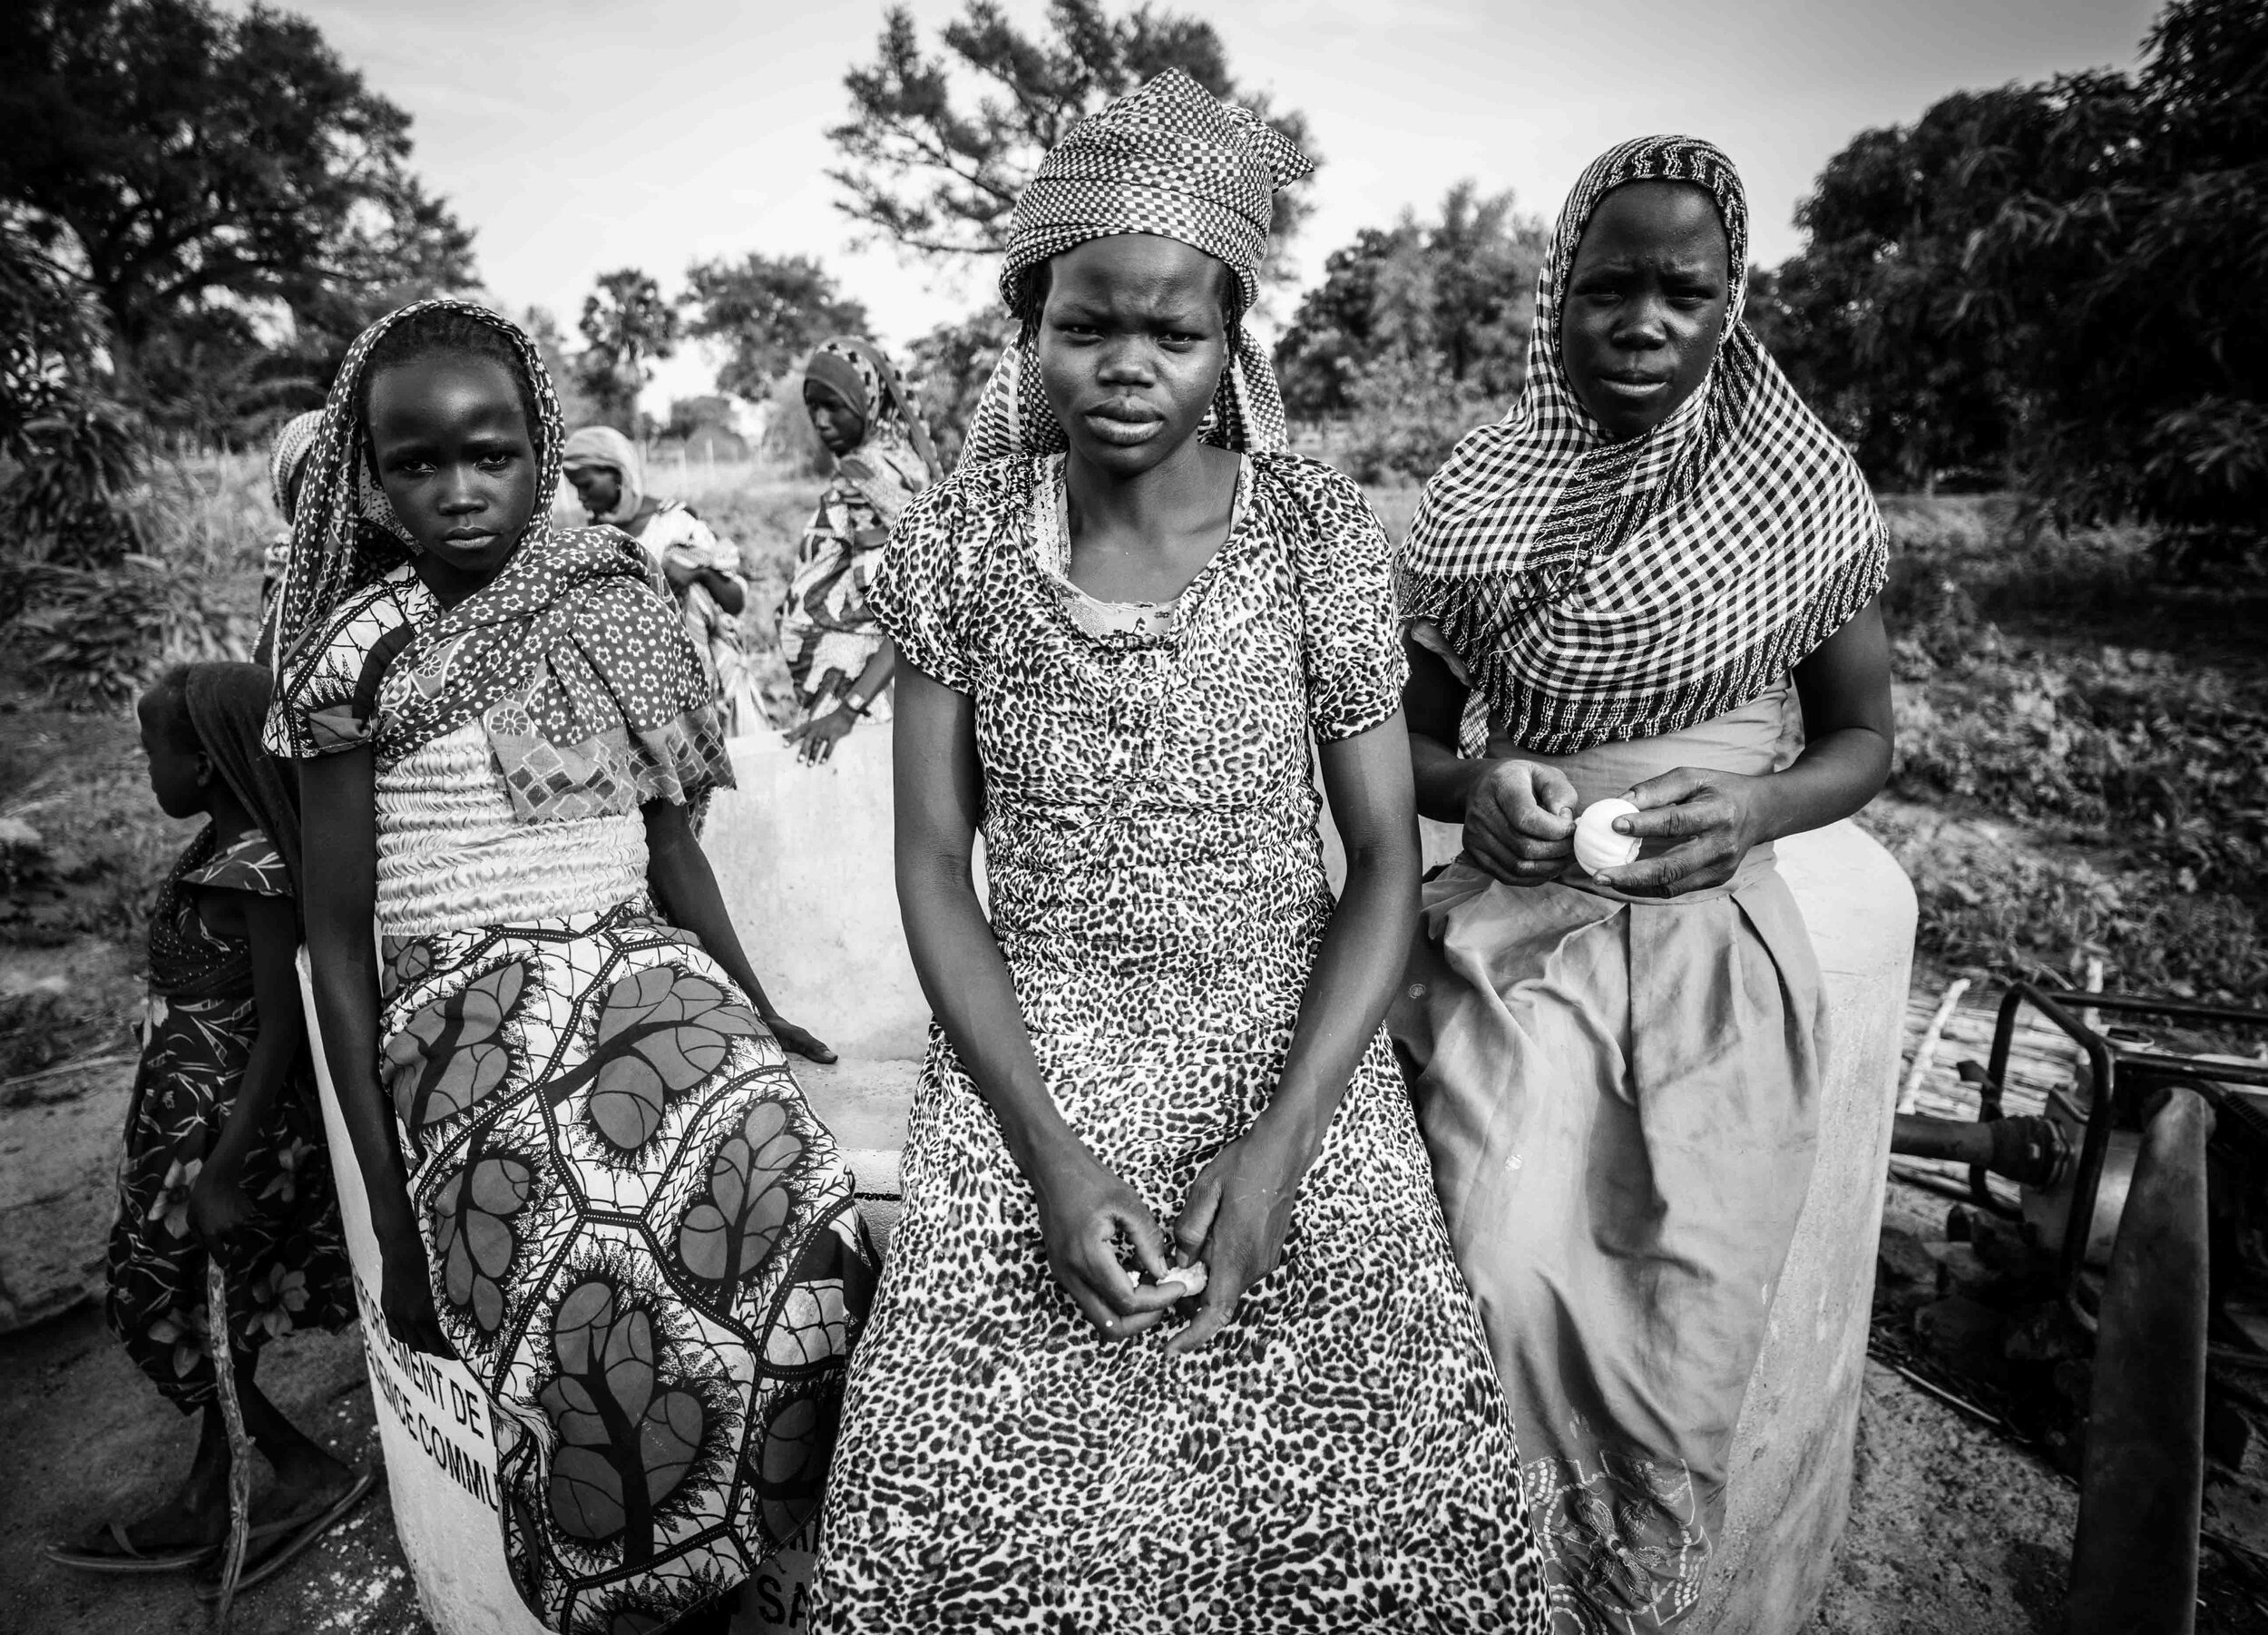  in Mongo we met a collective of women who had lost their men to war and came together afterwards to collectively work in their field and provide for themselves and their families. Chad, 2016 